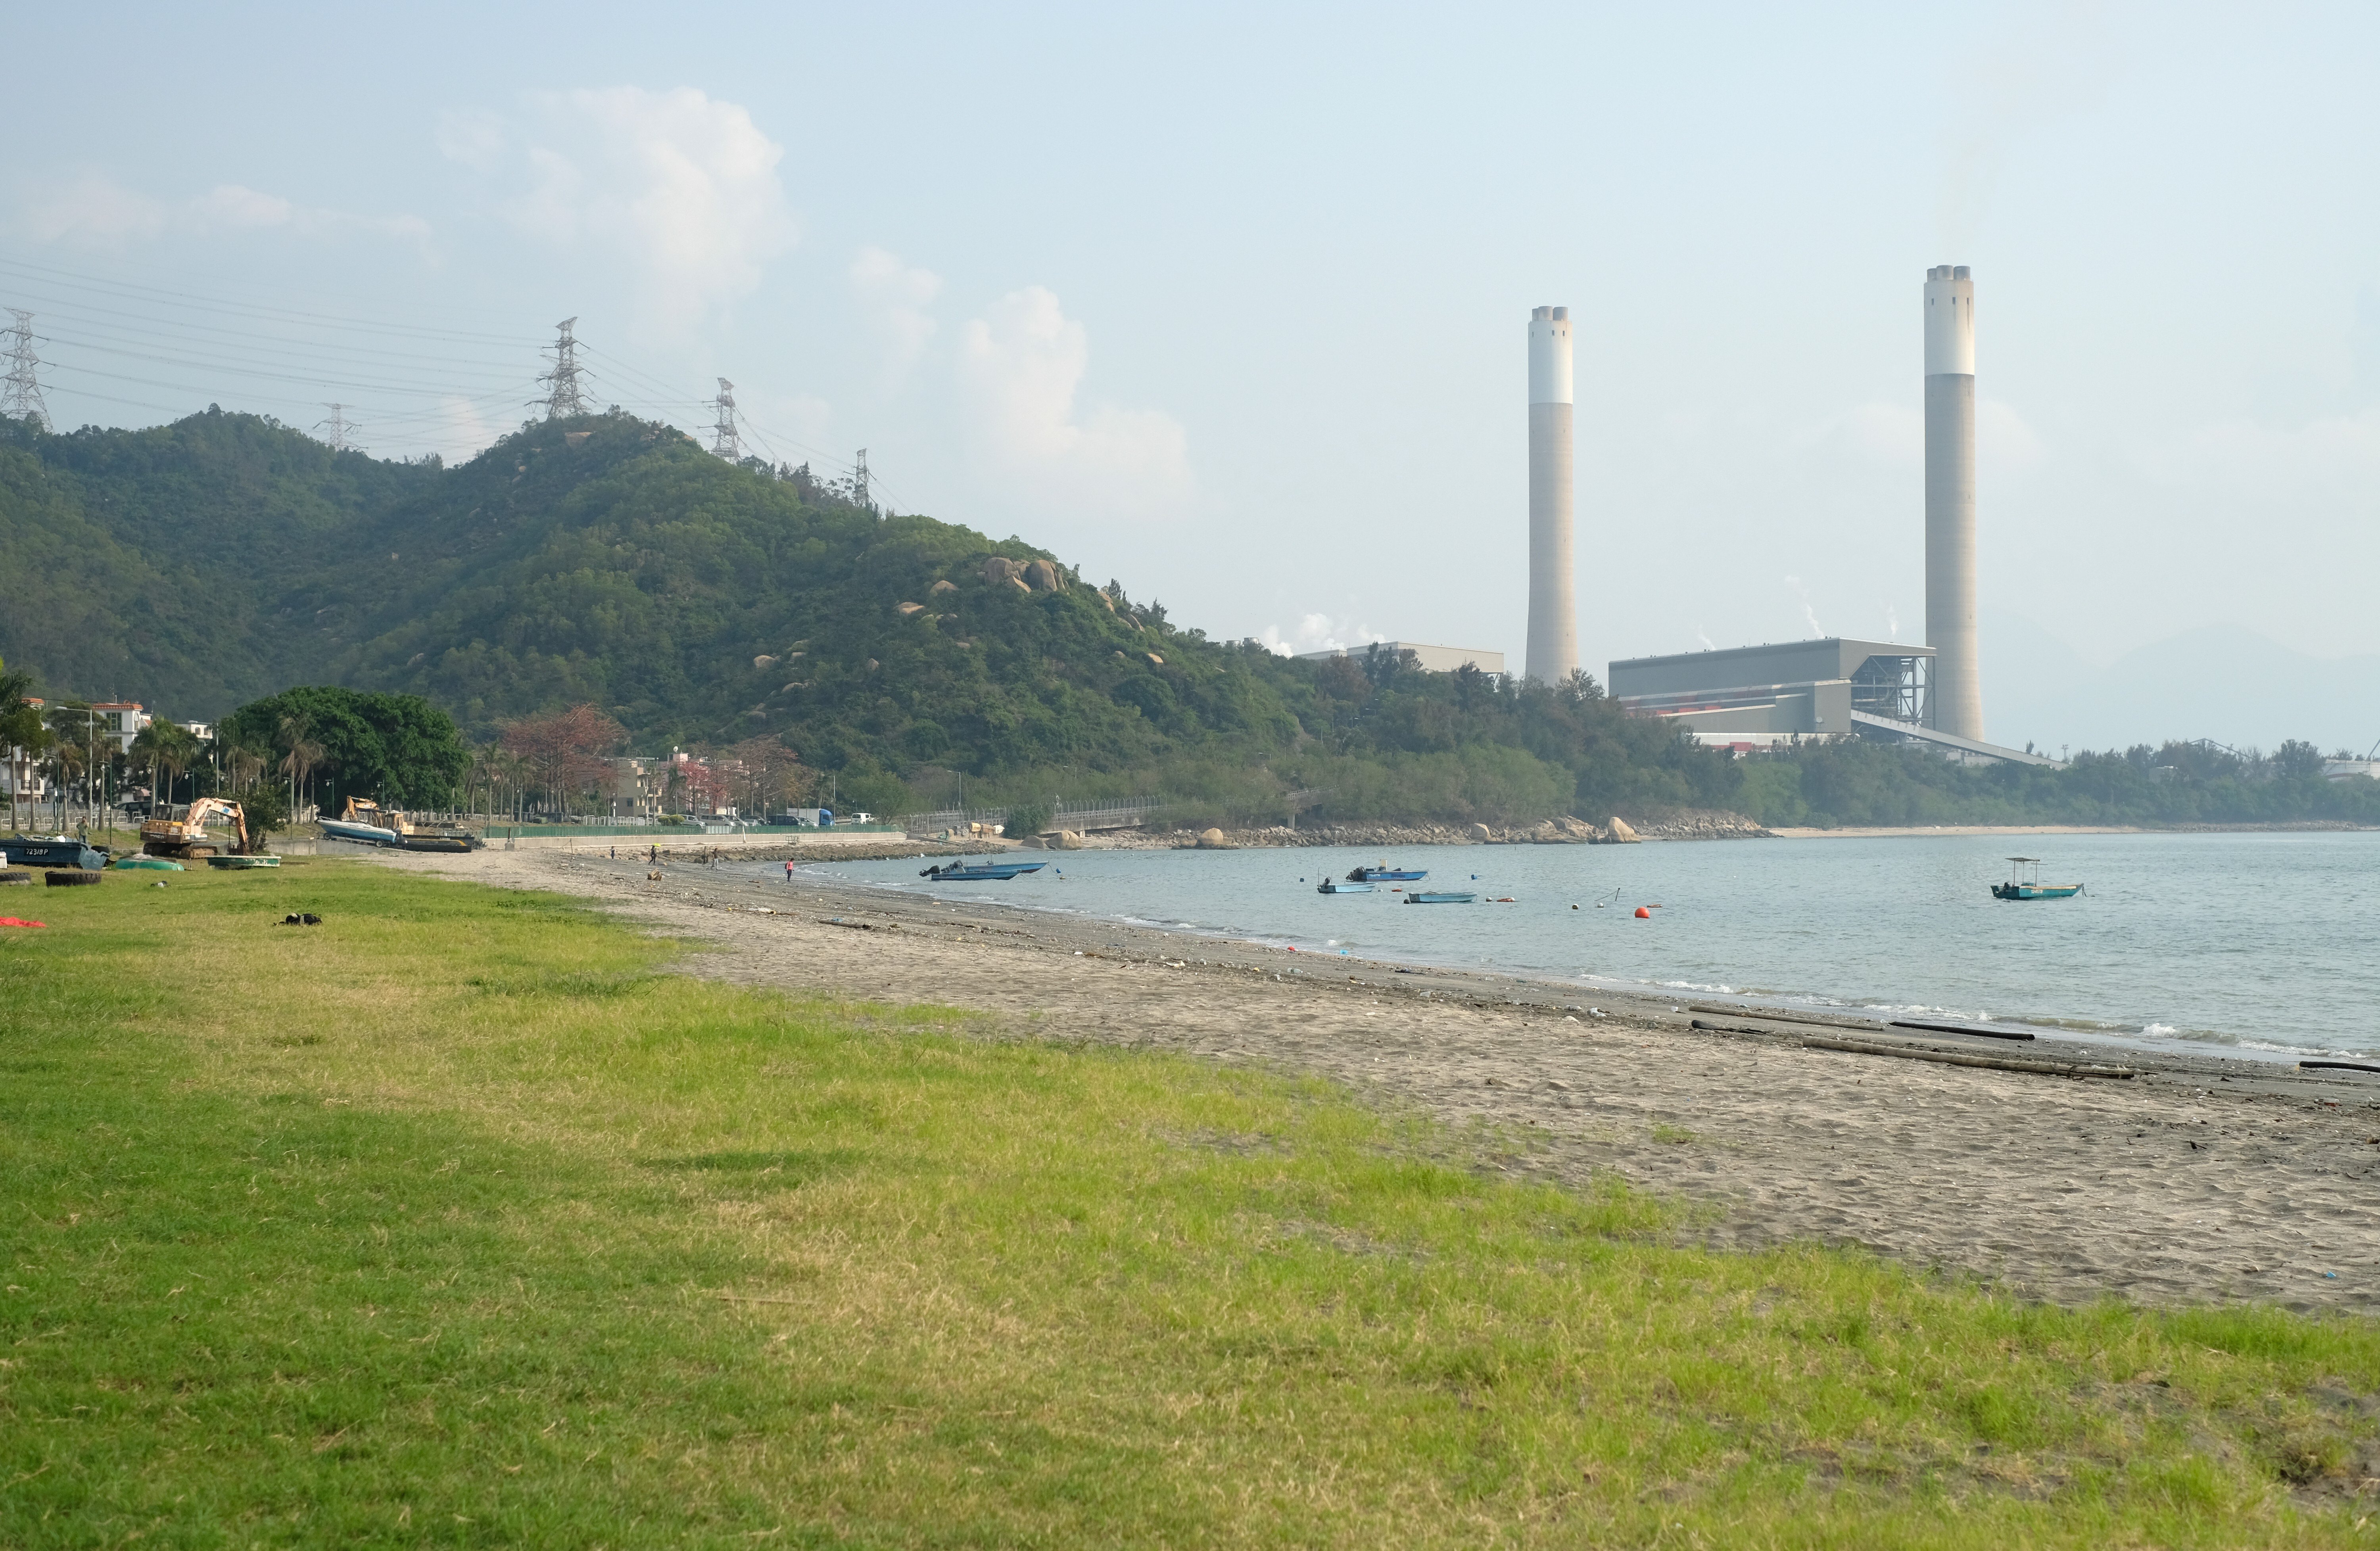 CLP Holdings’ Castle Peak Power Station towers over Lung Kwu Tan, a beach in Tuen Mun. As Hong Kong goes carbon neutral, CLP is looking to deploy hydrogen in its power plants. Photo: Fung Chang